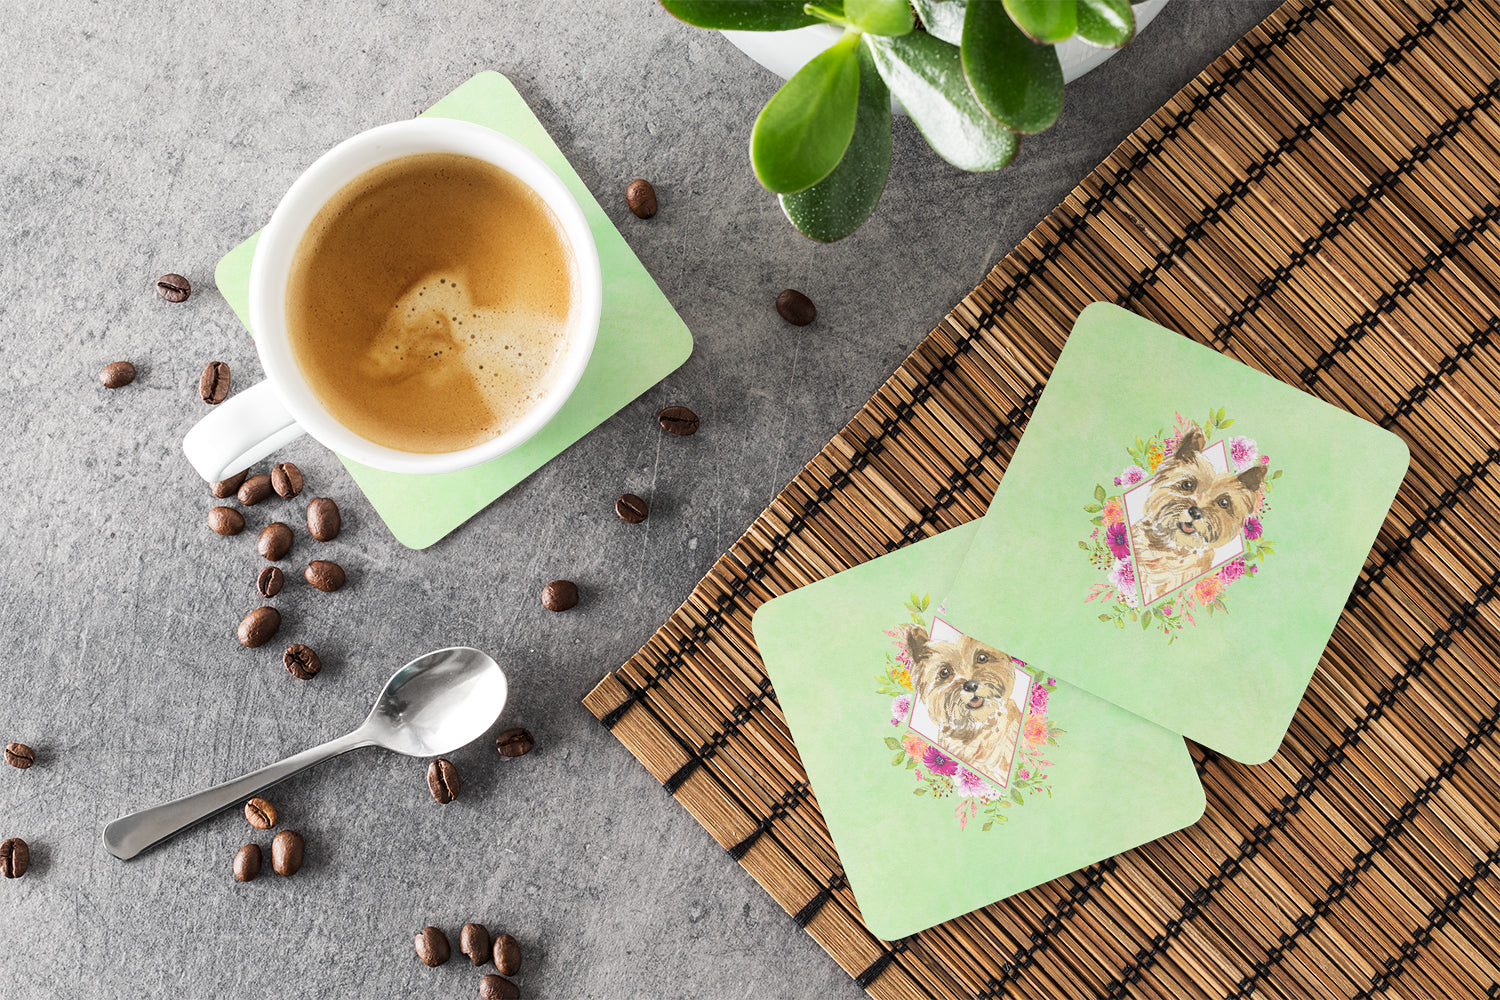 Set of 4 Cairn Terrier Green Flowers Foam Coasters Set of 4 CK4410FC - the-store.com